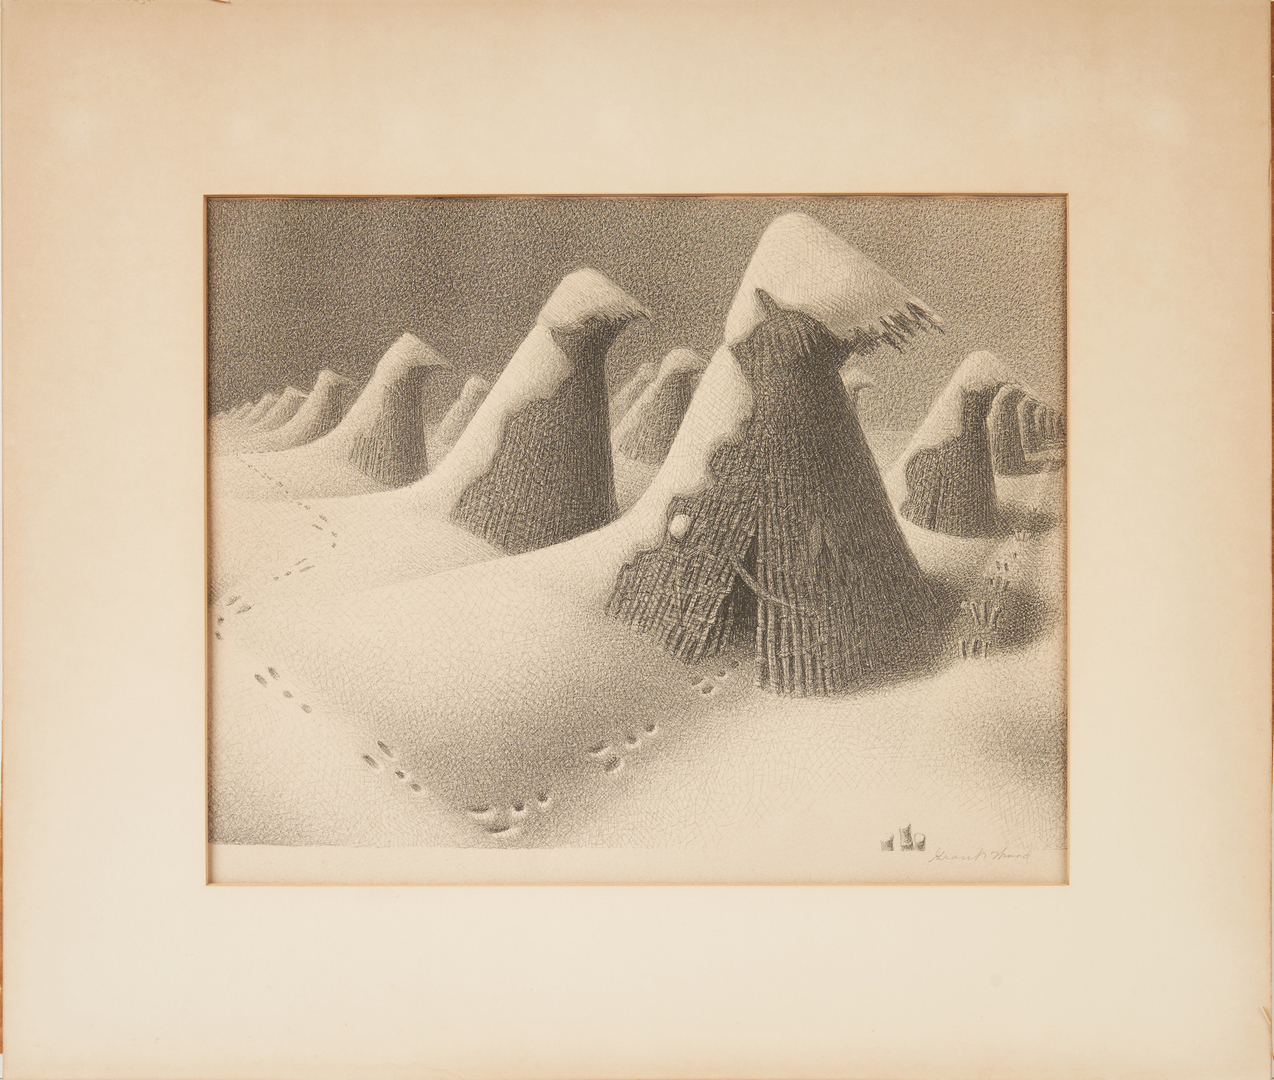 Lot 113: Grant Wood Signed Lithograph, "January"